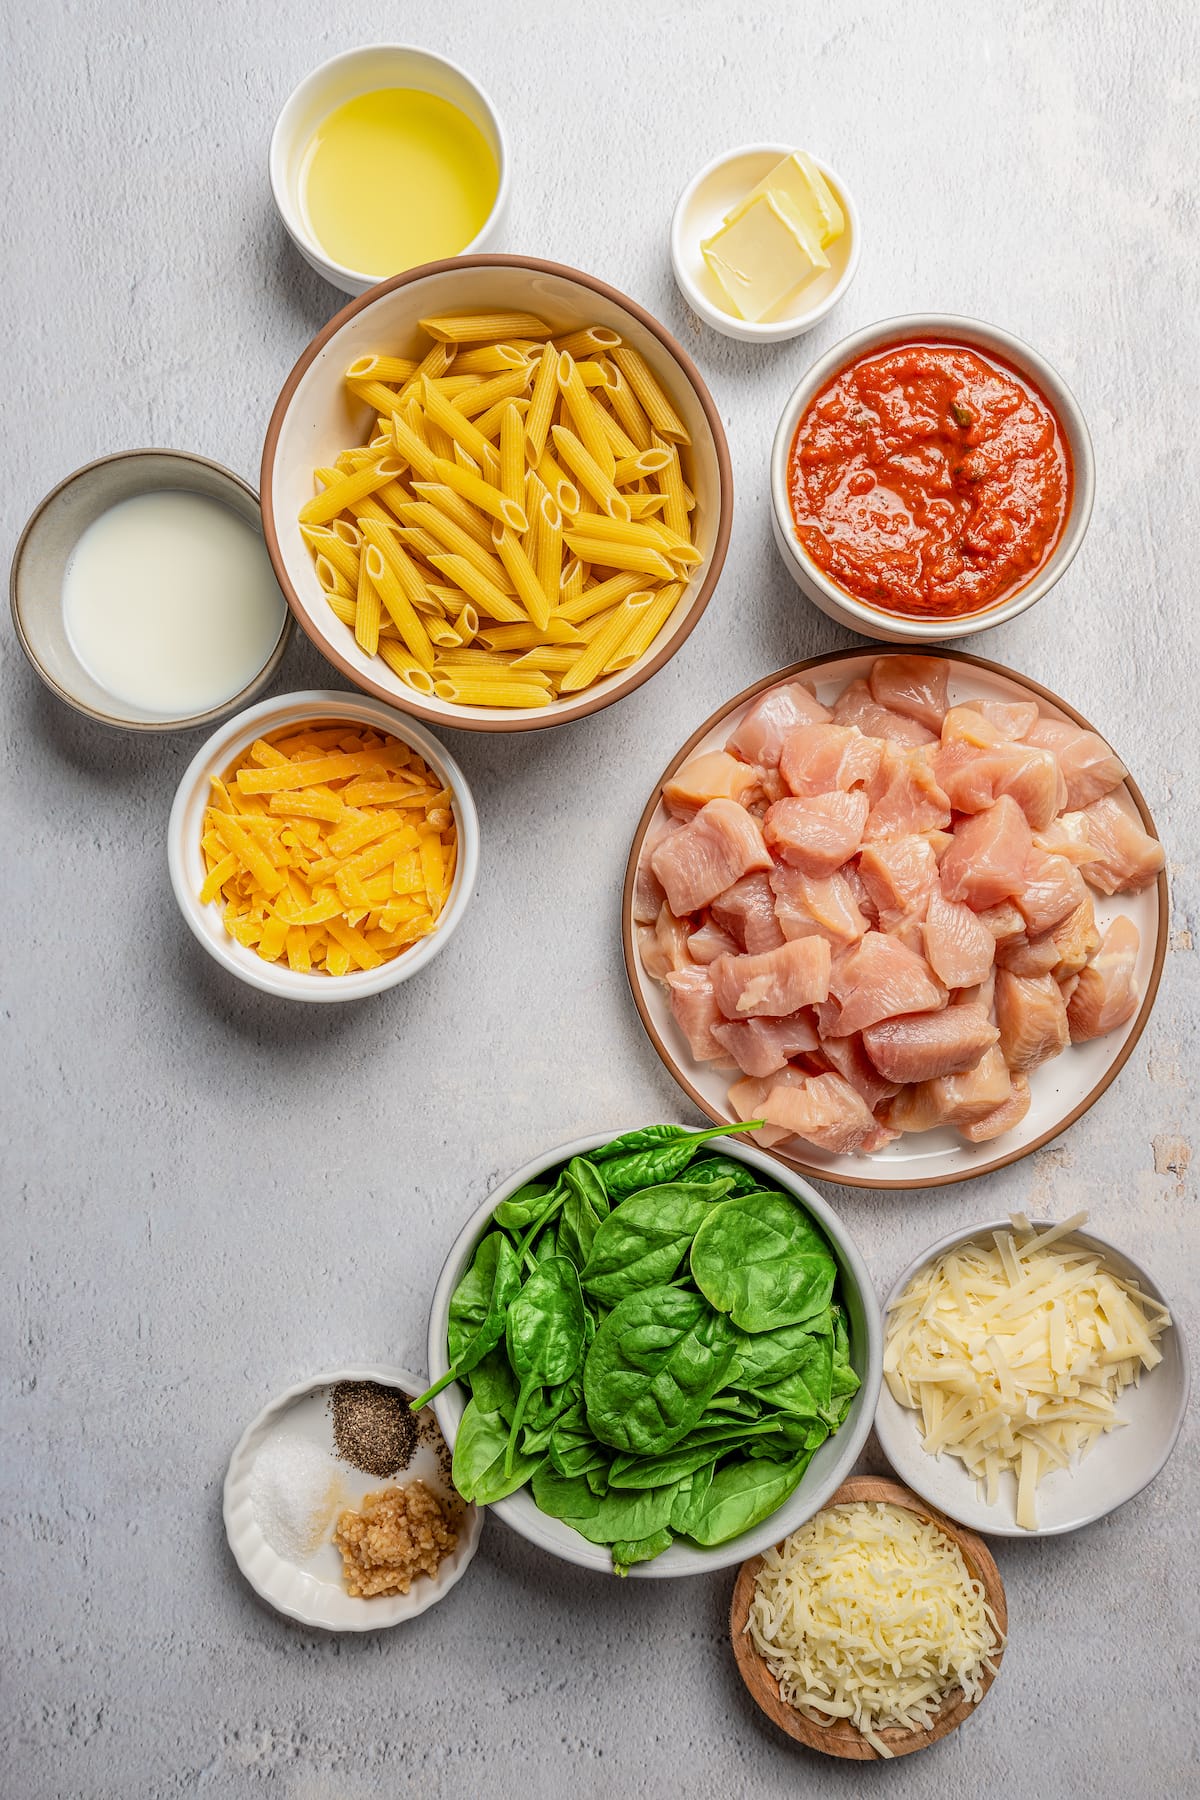 The ingredients for a chicken pasta bake.